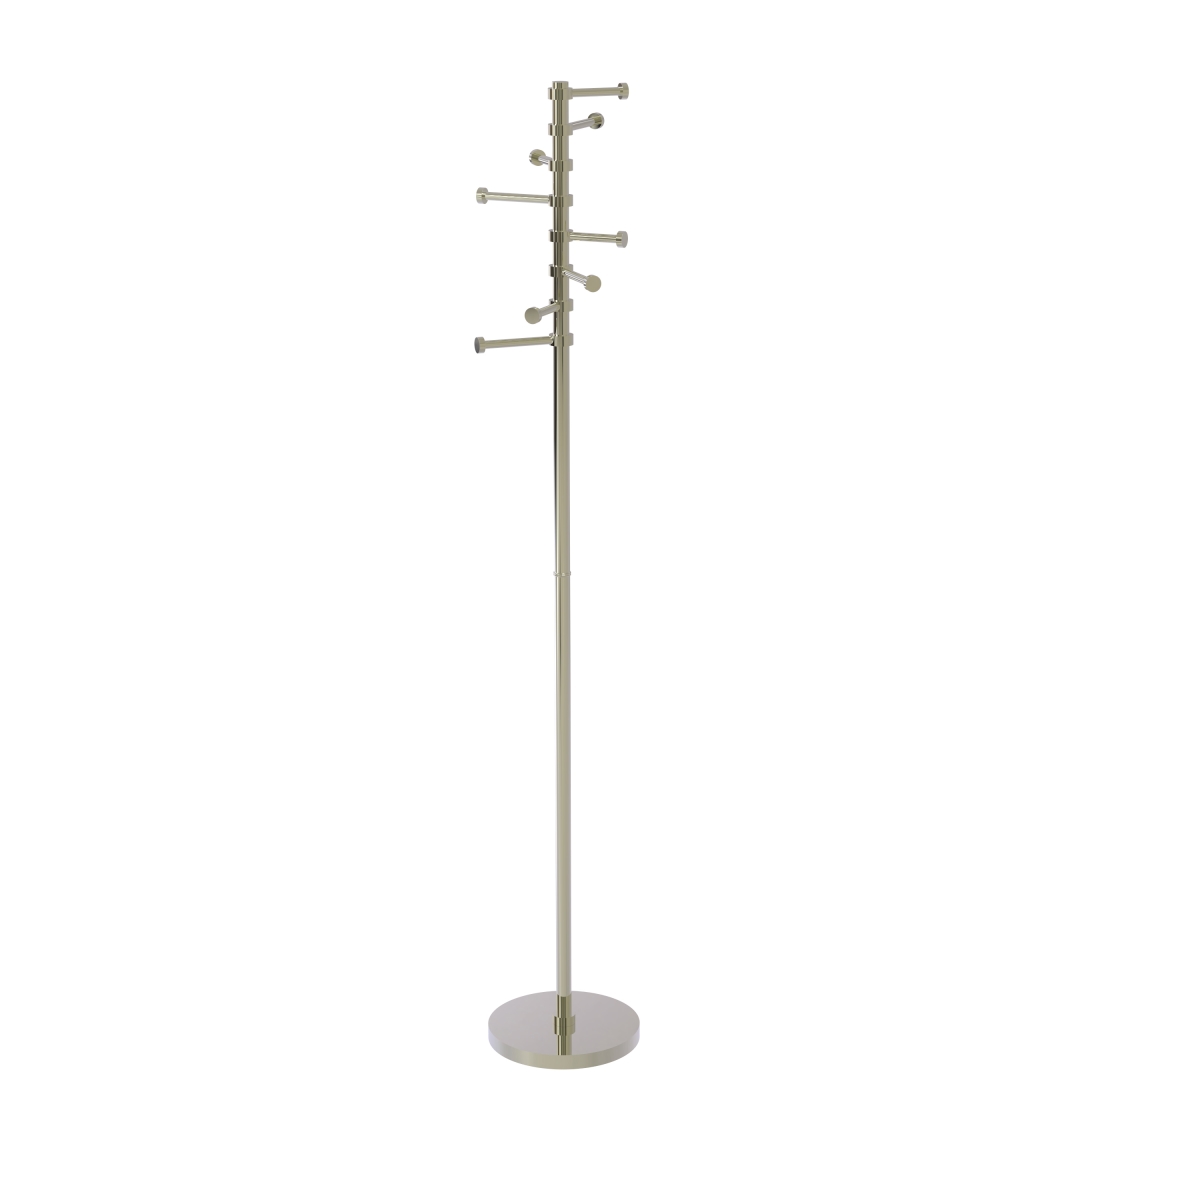 Picture of Allied Brass CS-1-PNI Free Standing Coat Rack with Six Pivoting Pegs, Polished Nickel